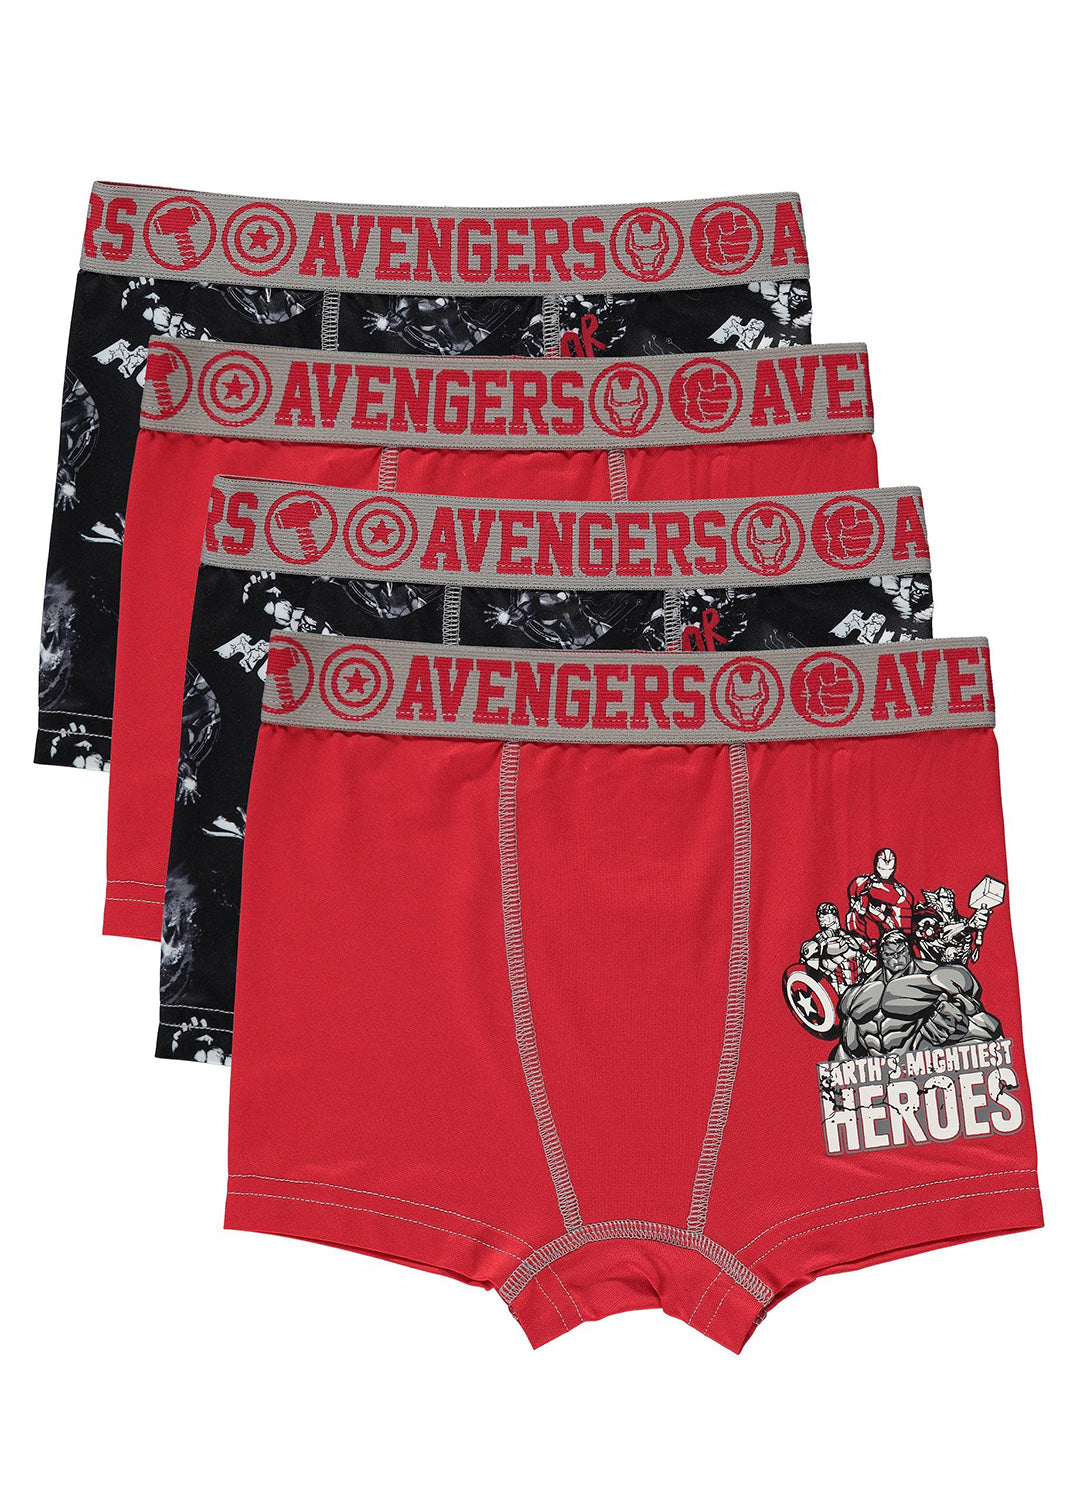 Boys Avengers 4 pack of boxers red and black